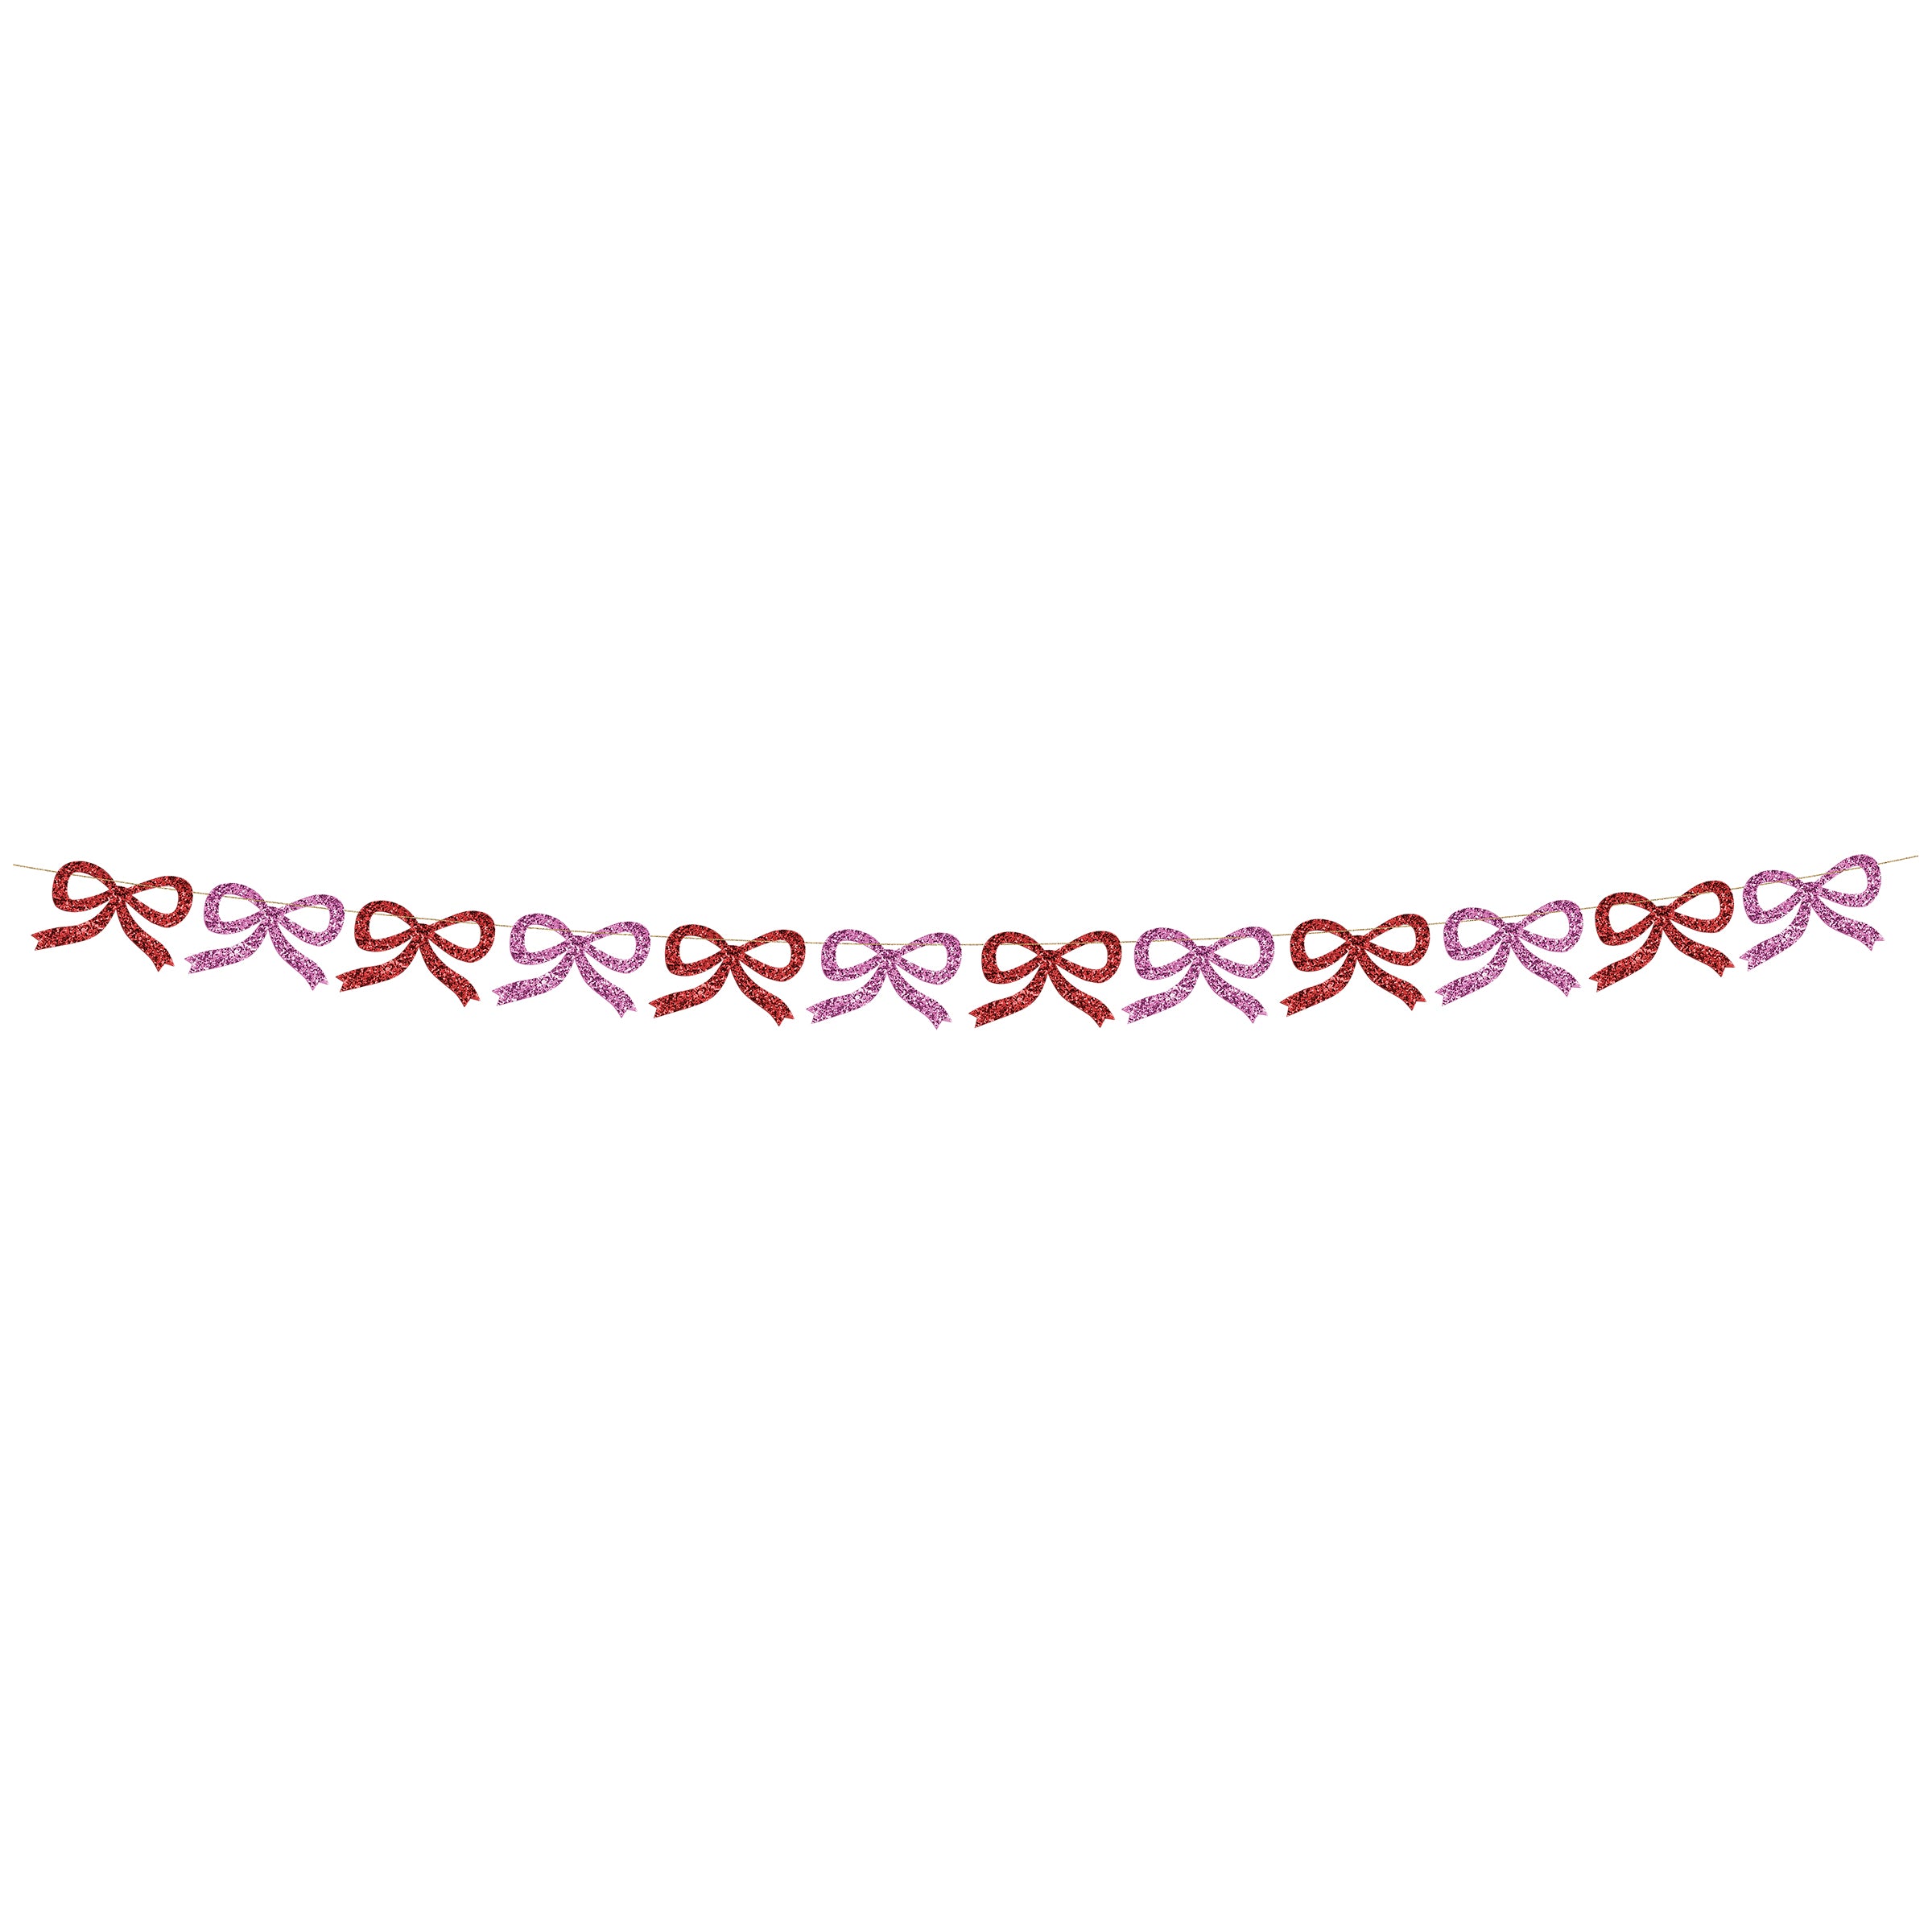 Our Christmas garland is crafted with red and pink glitter fabric bows, perfect for a Christmas wall decoration or Christmas table decoration.